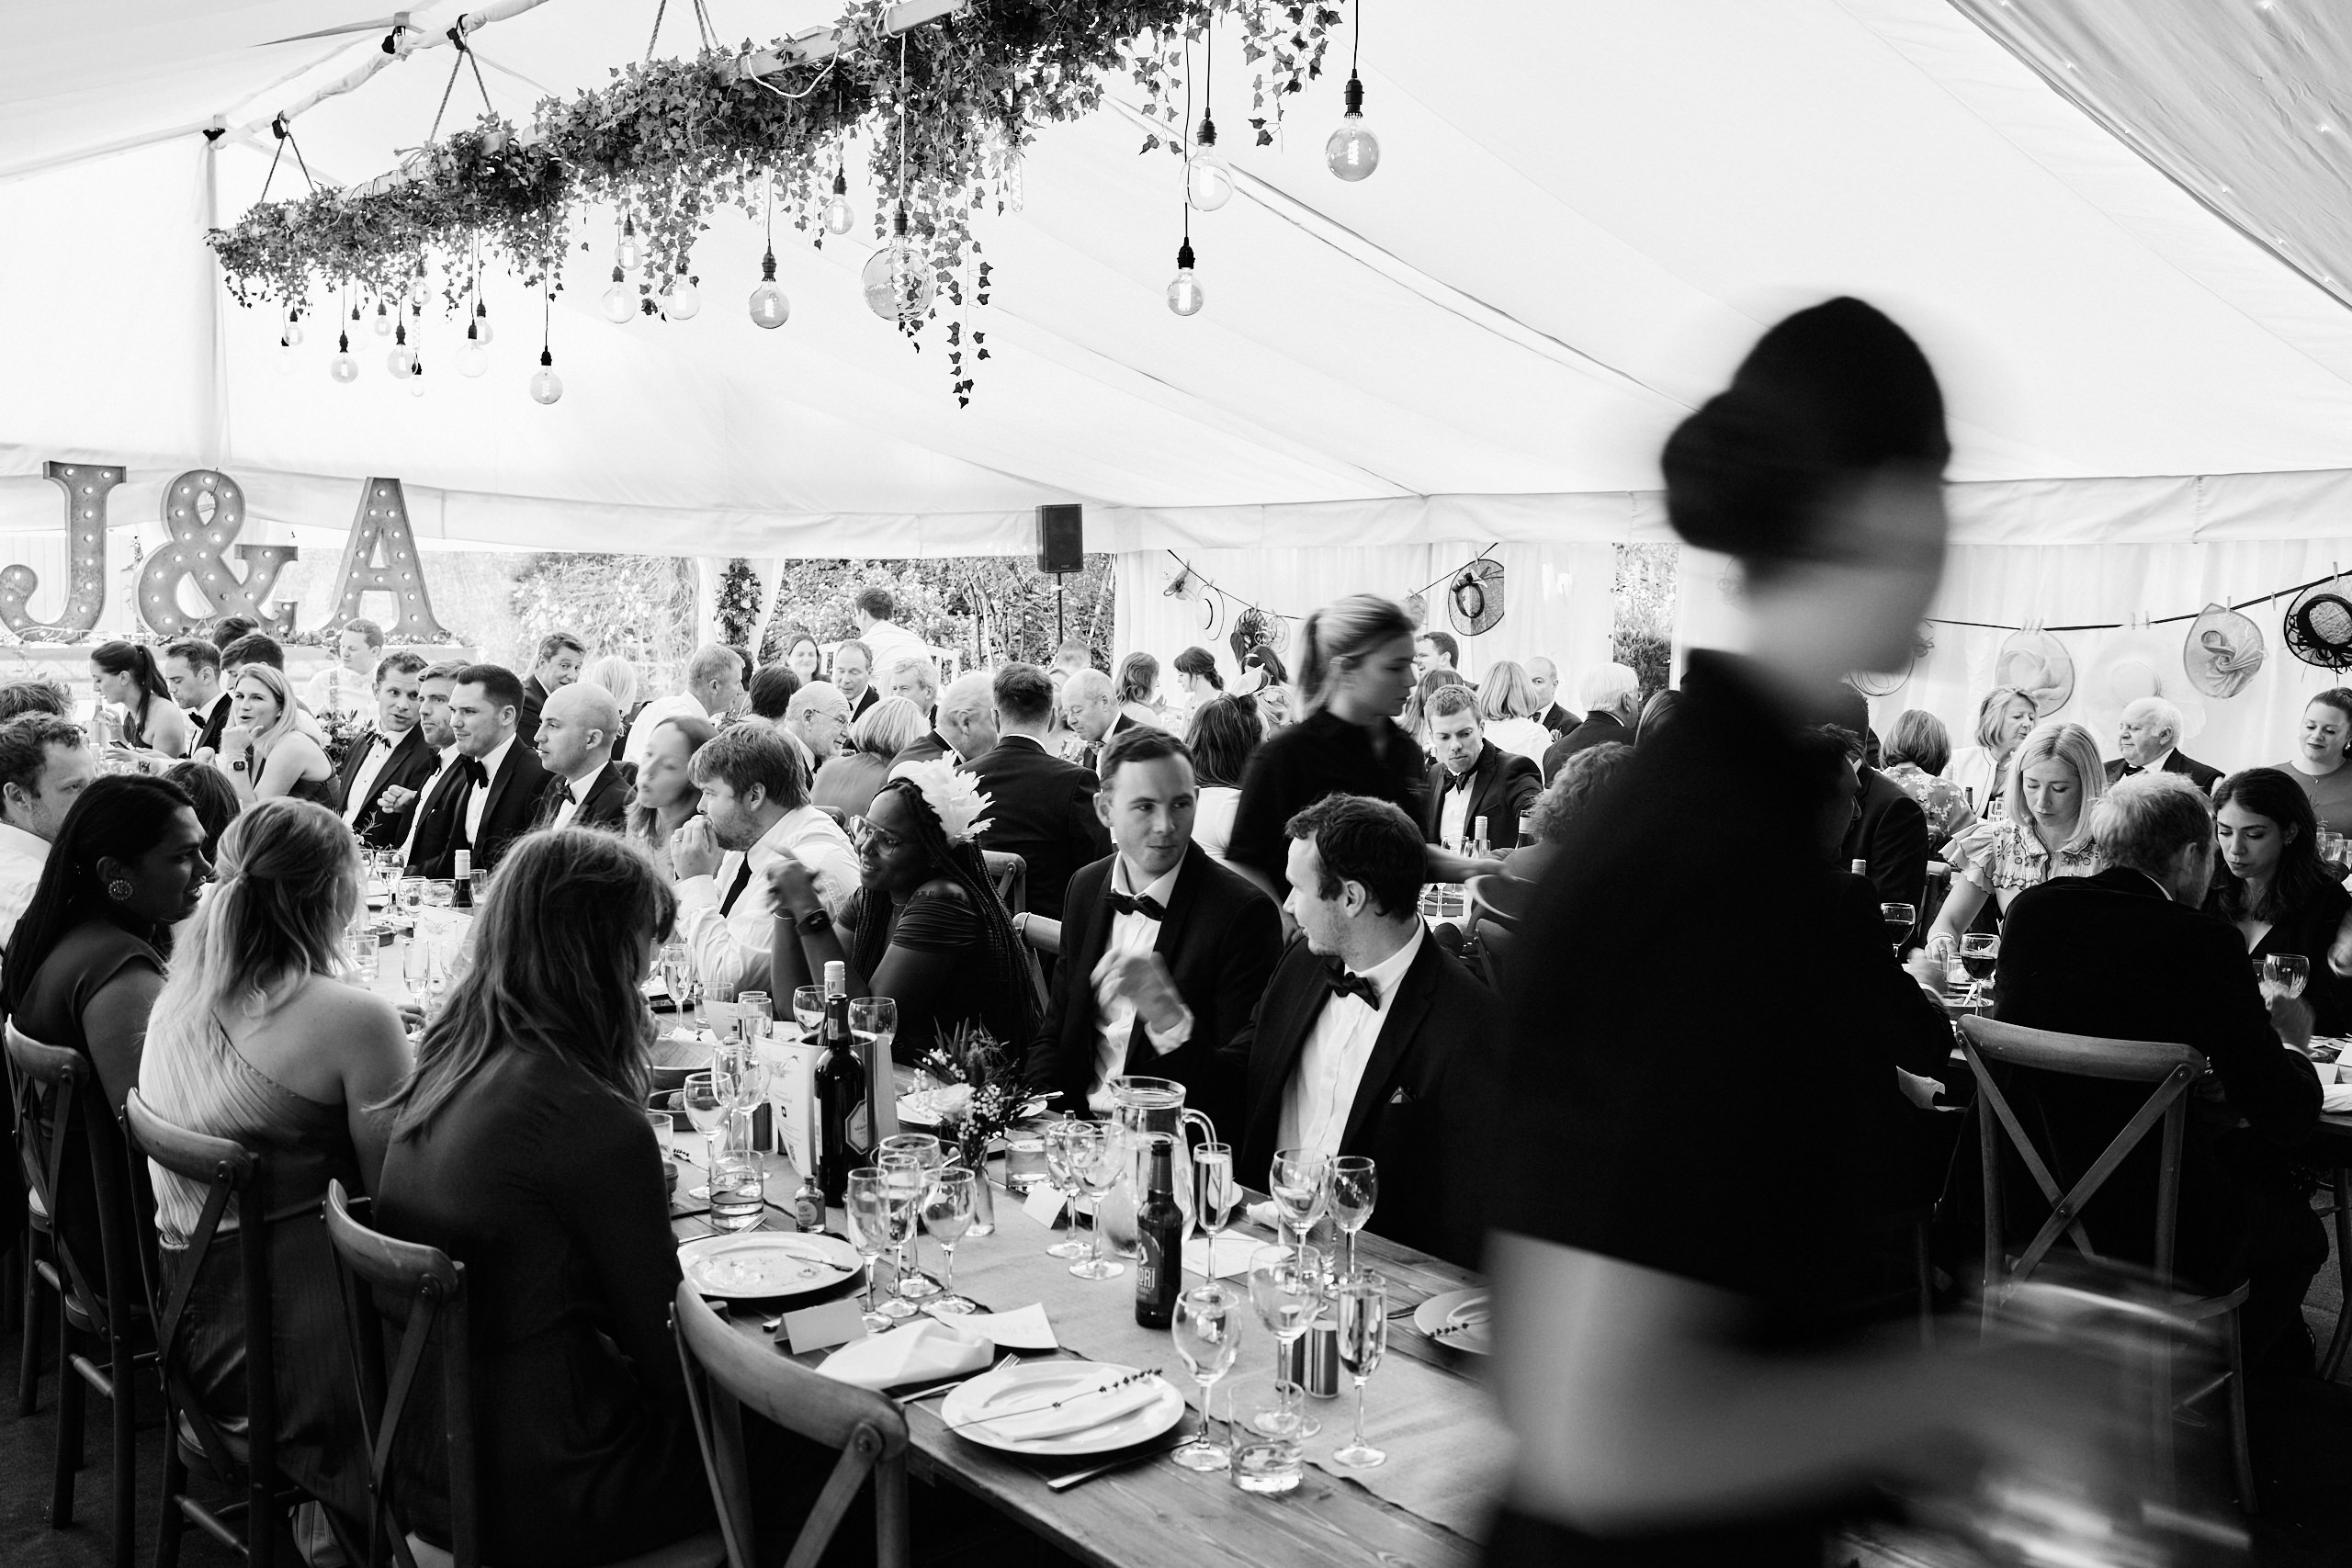 A picture in black and white showing a wedding party in a tent.